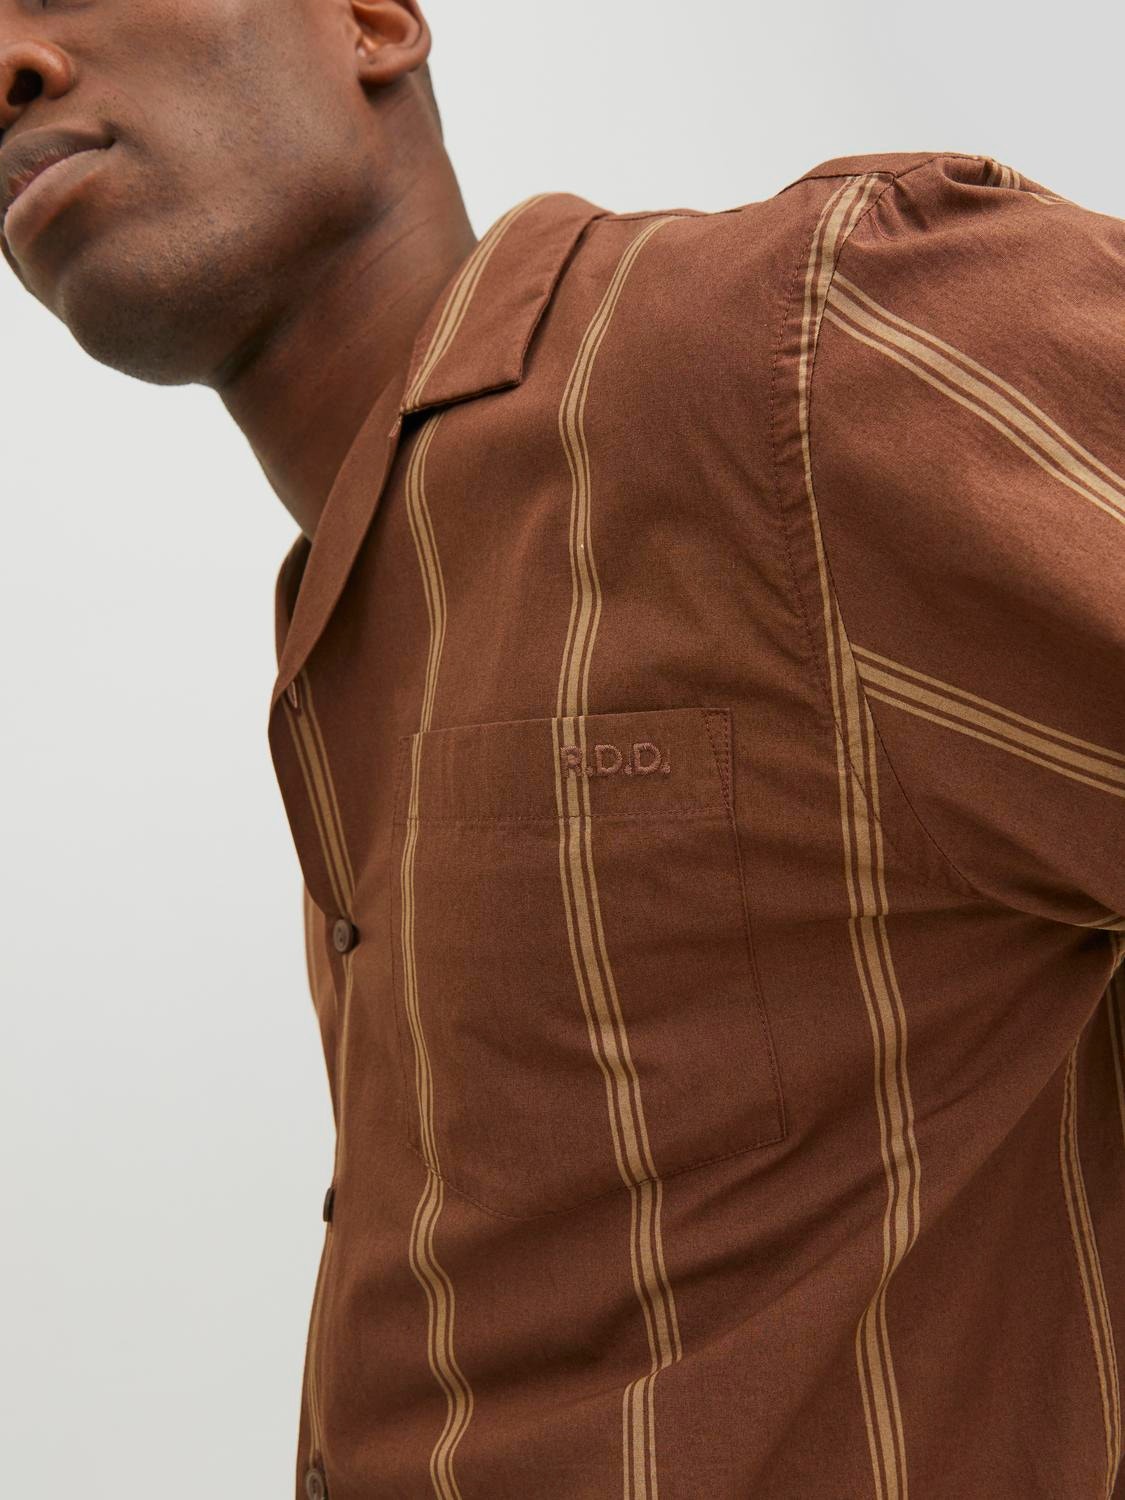 Jack & Jones RDD Relaxed Fit Resort shirt -Cocoa Brown - 12232206